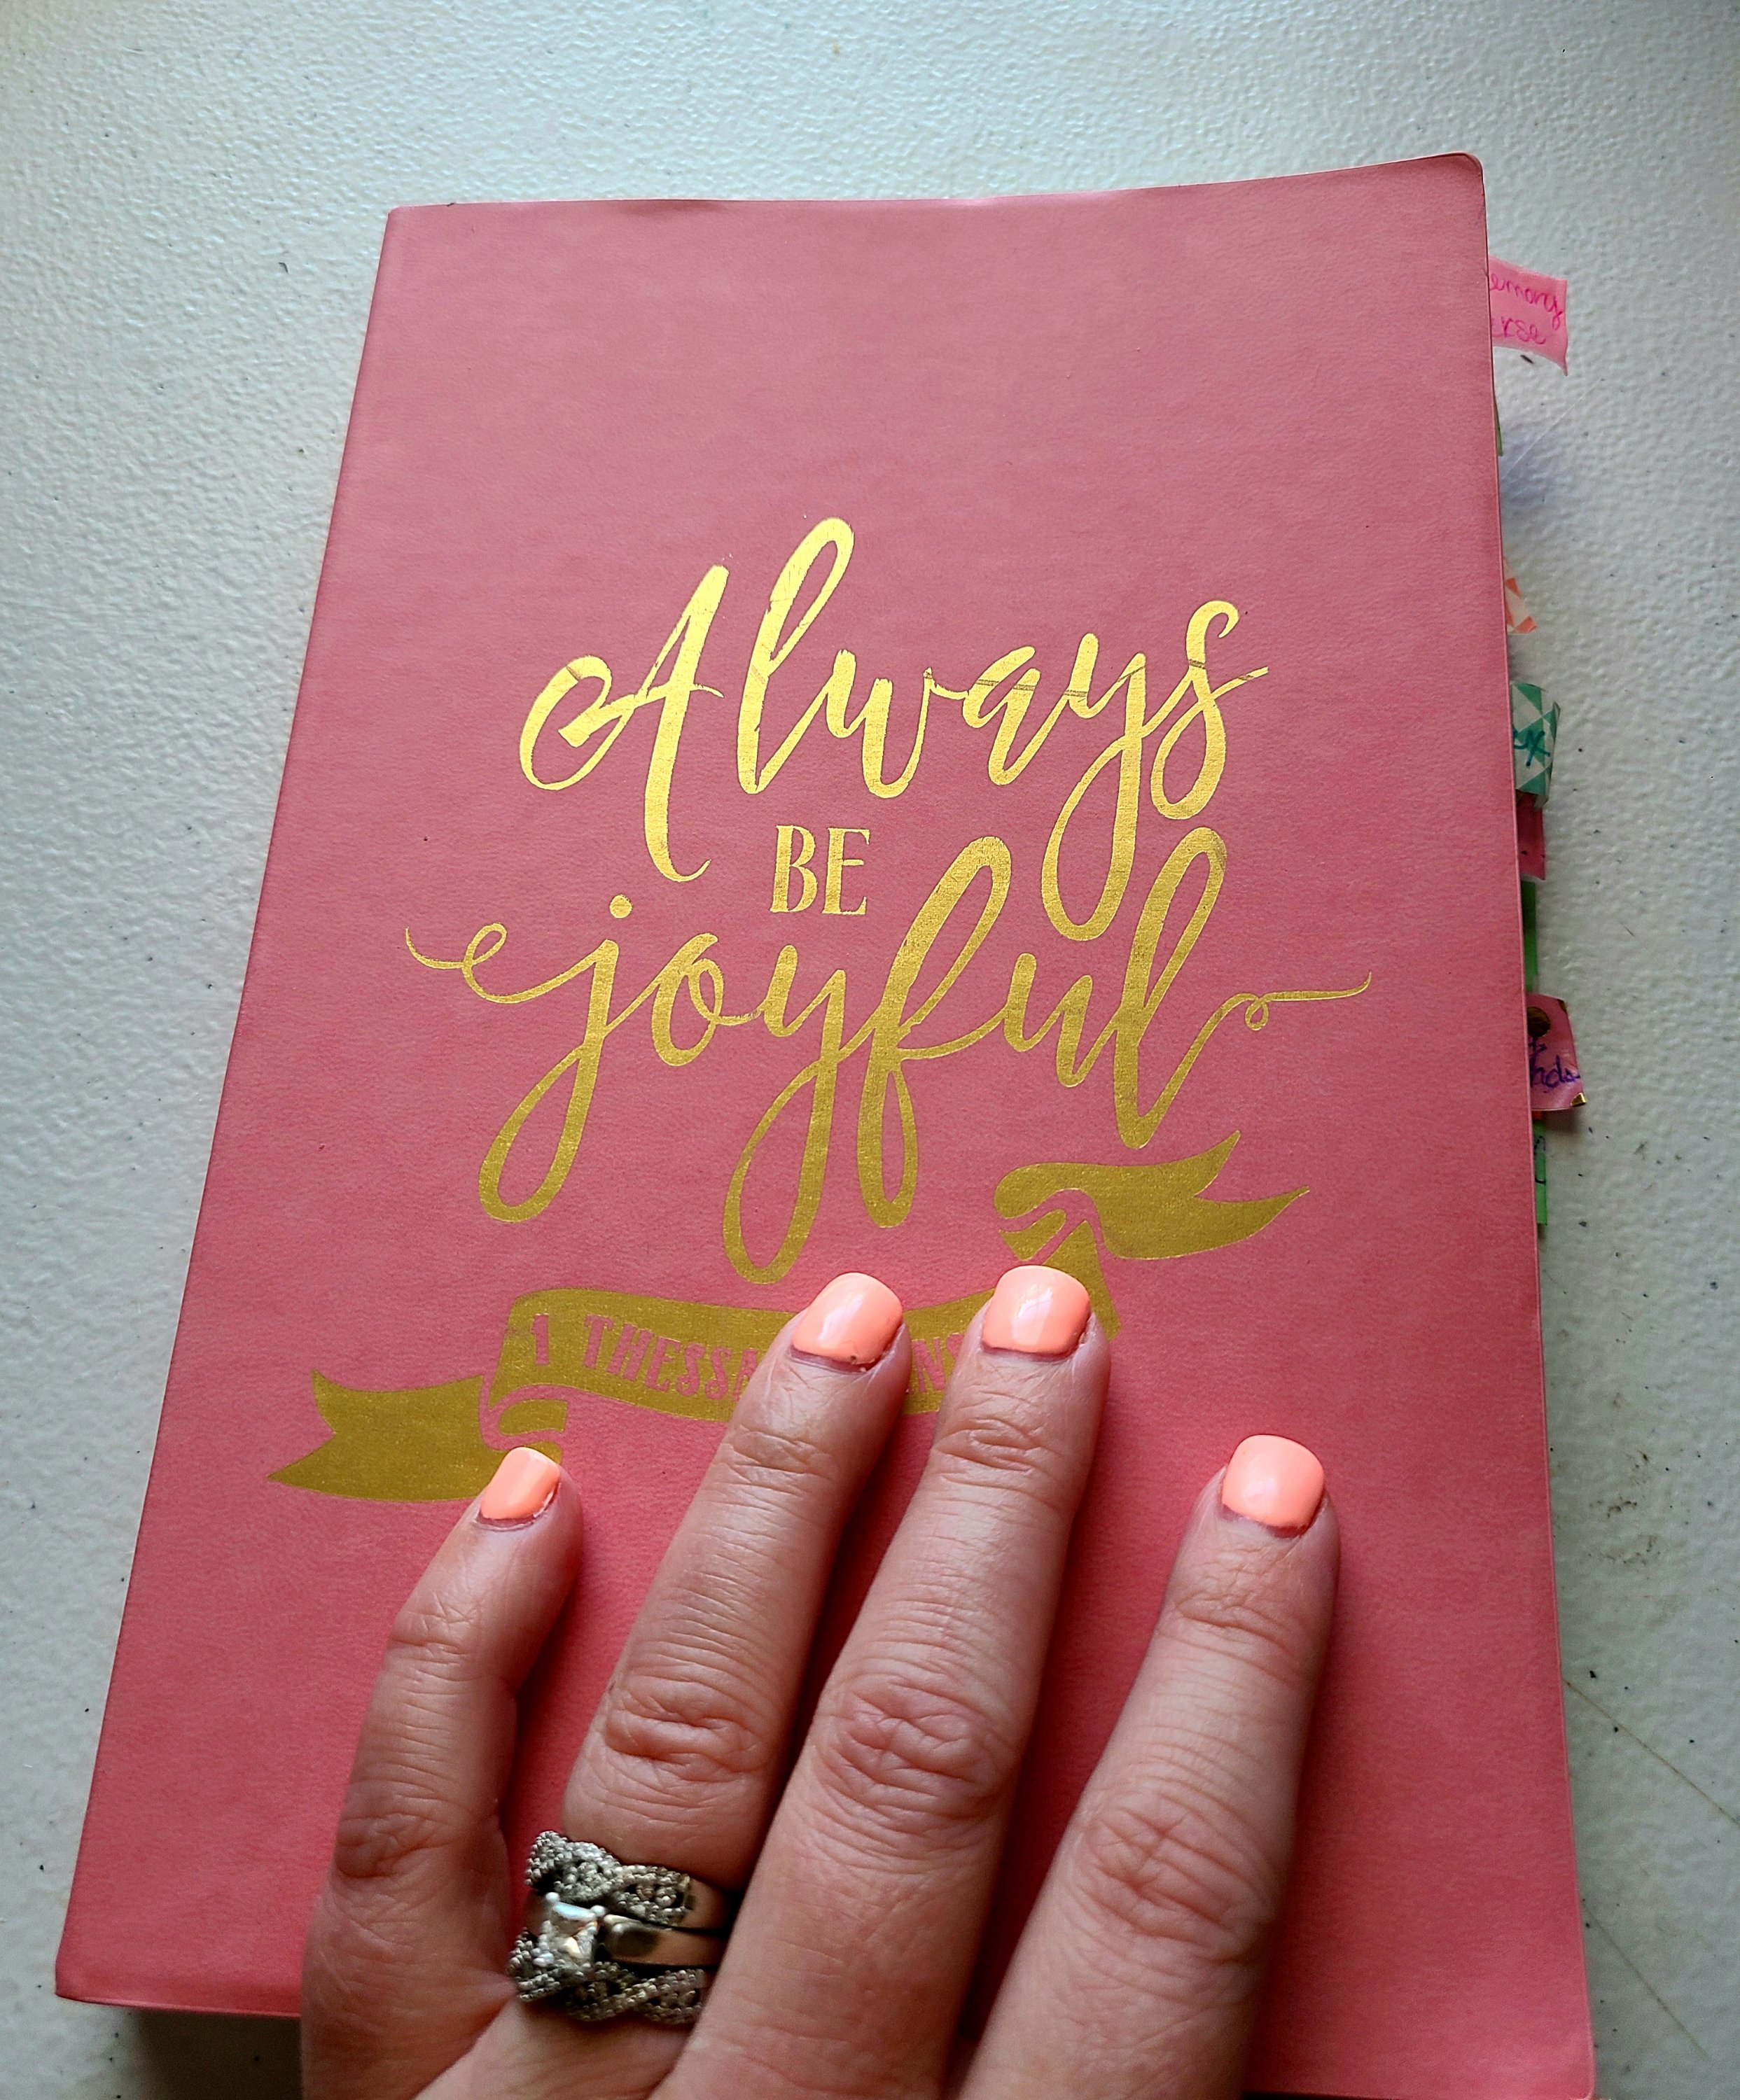 Cover of my prayer journal. A pink notebook with "Always be joyful" written in gold.